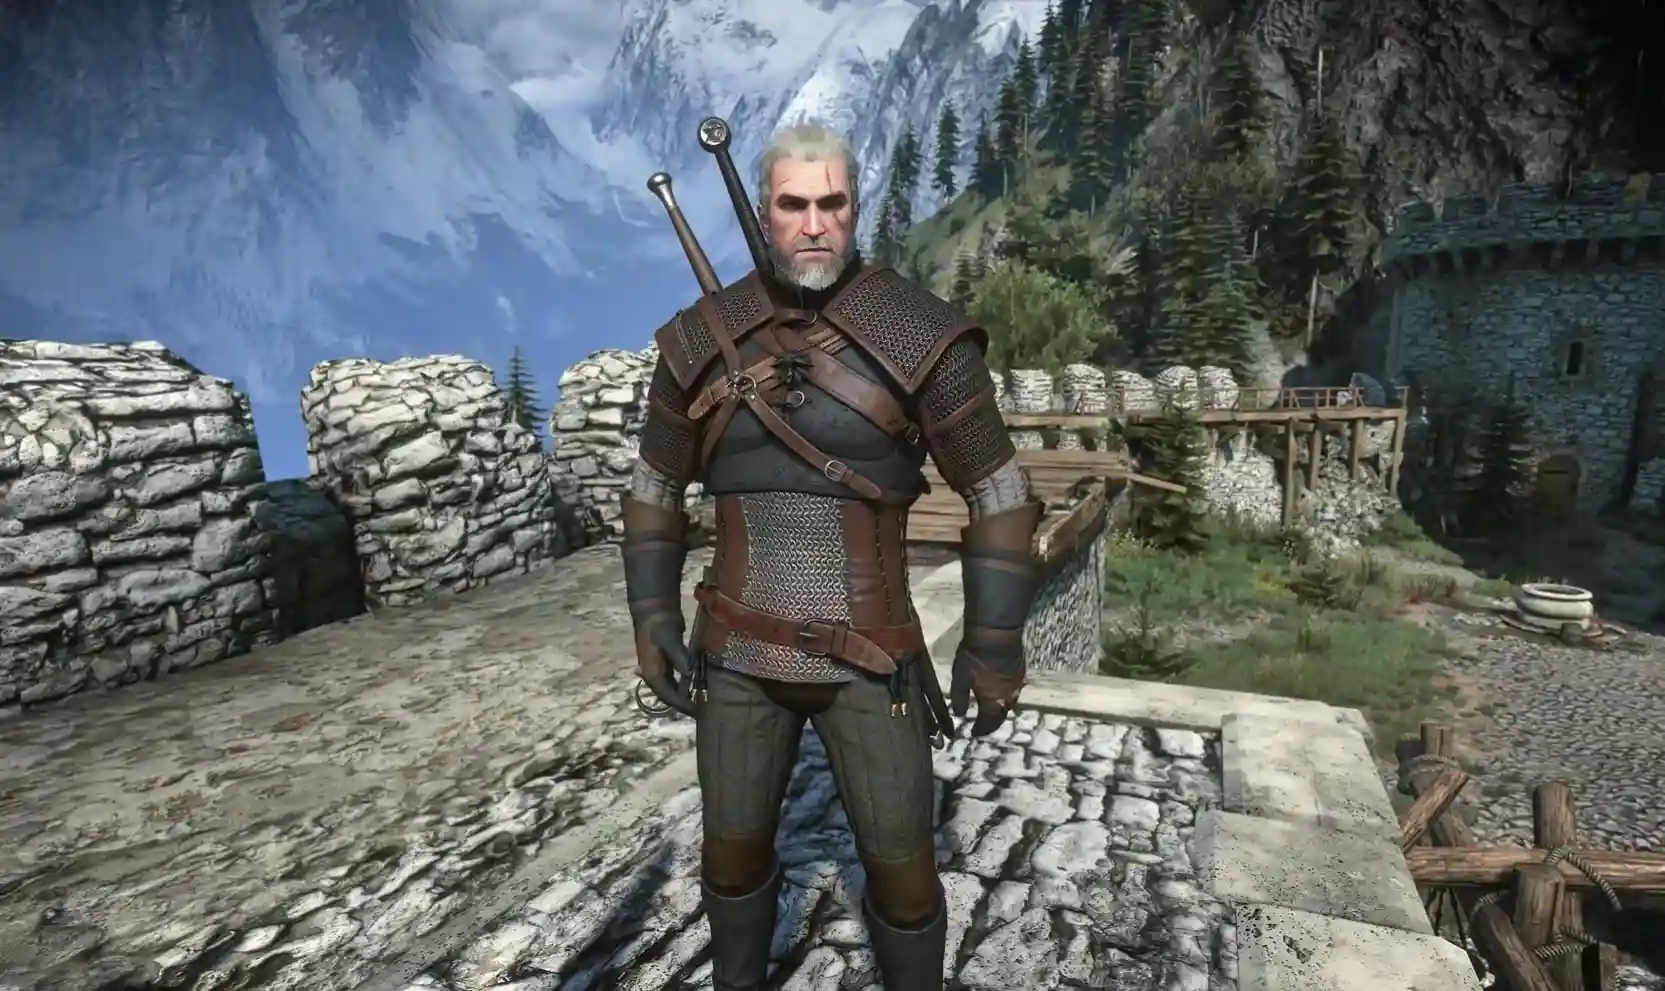 Appearance of the Kaer Morhen armor